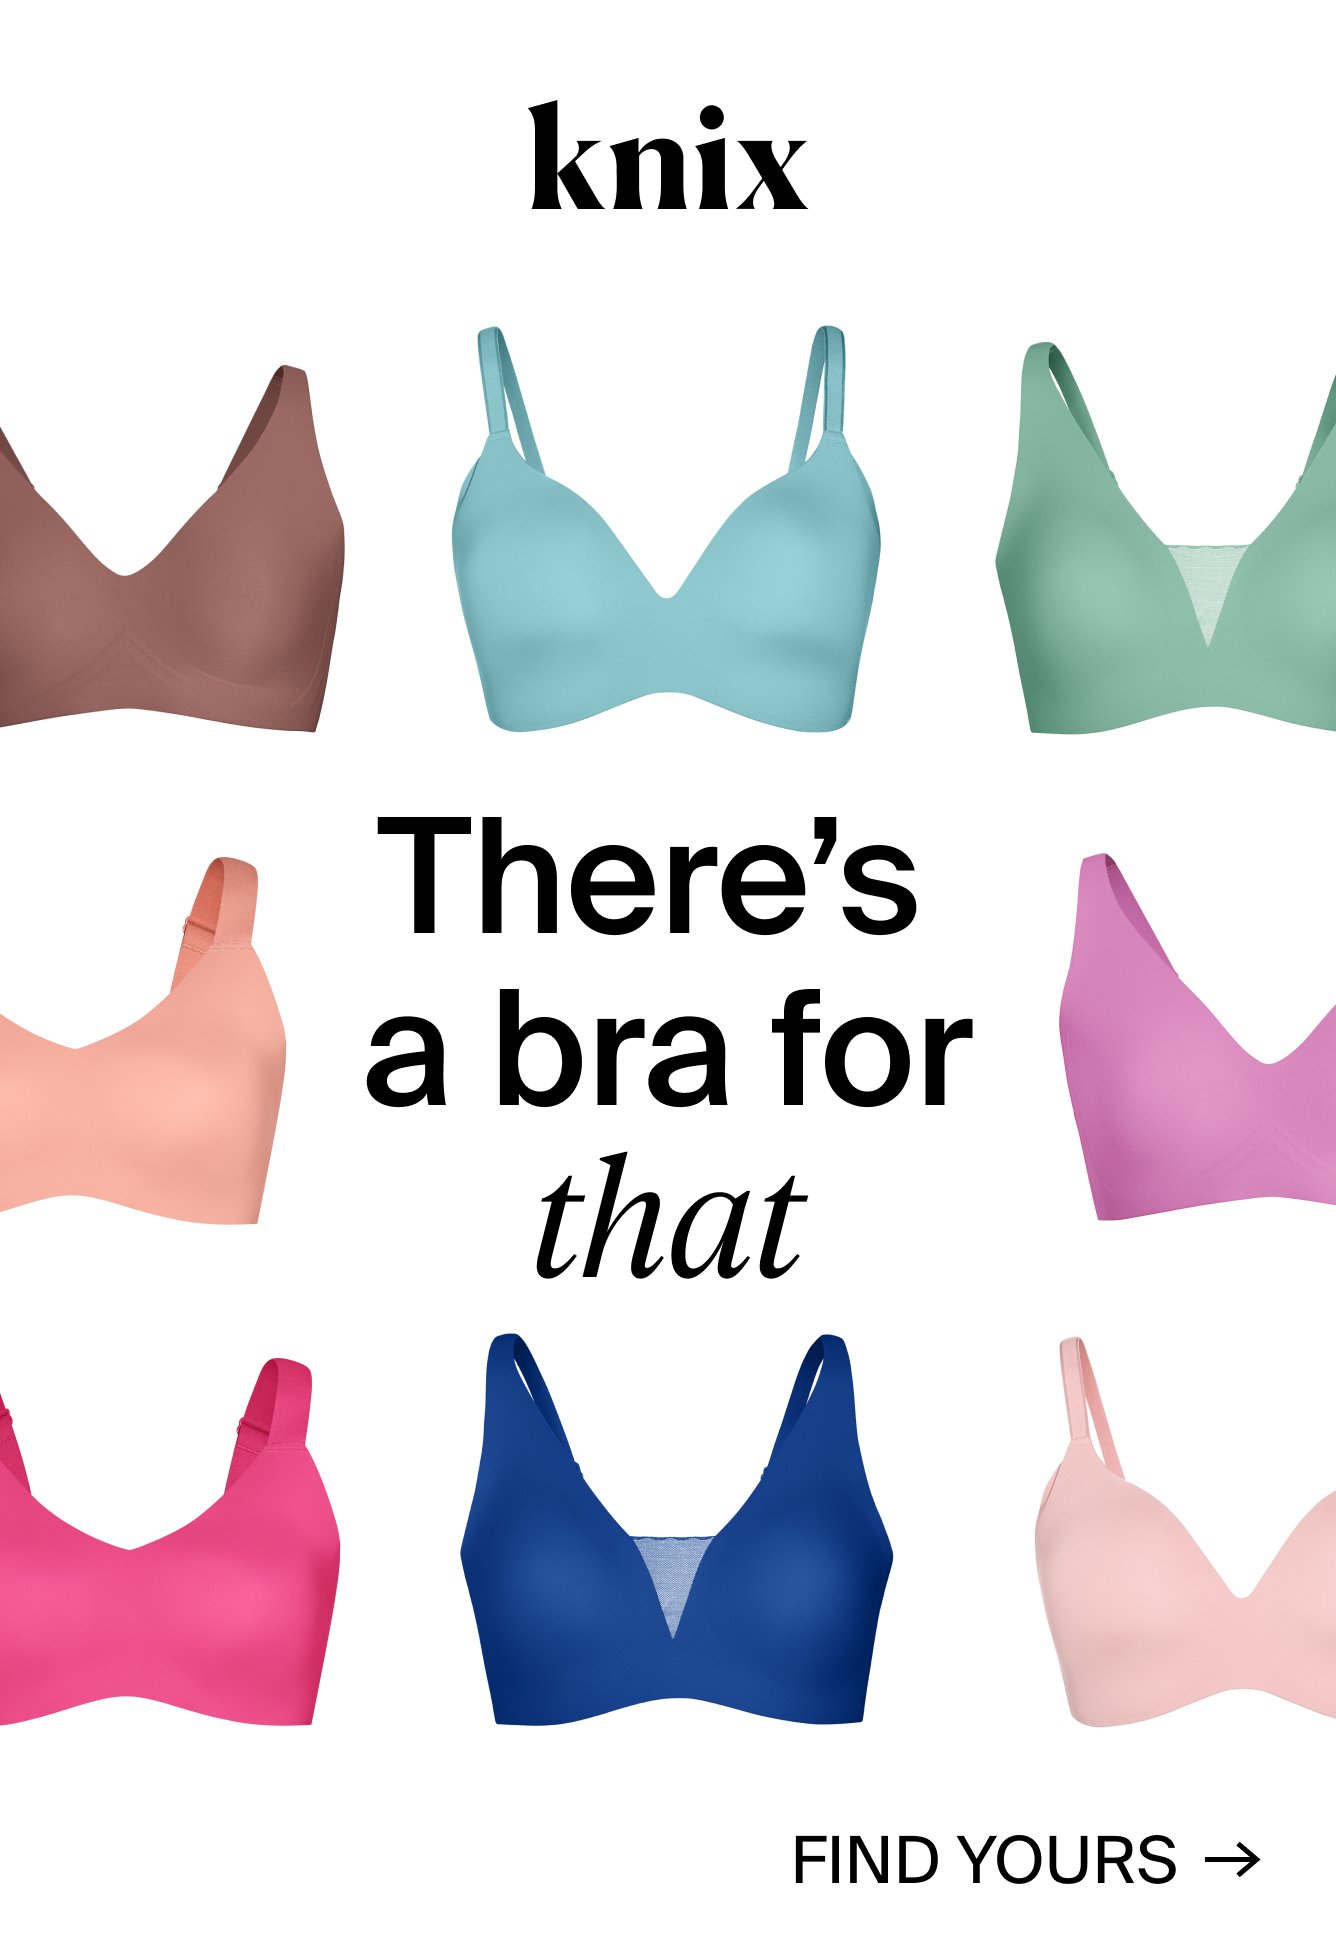 Knix: Bras for any occasion 💅